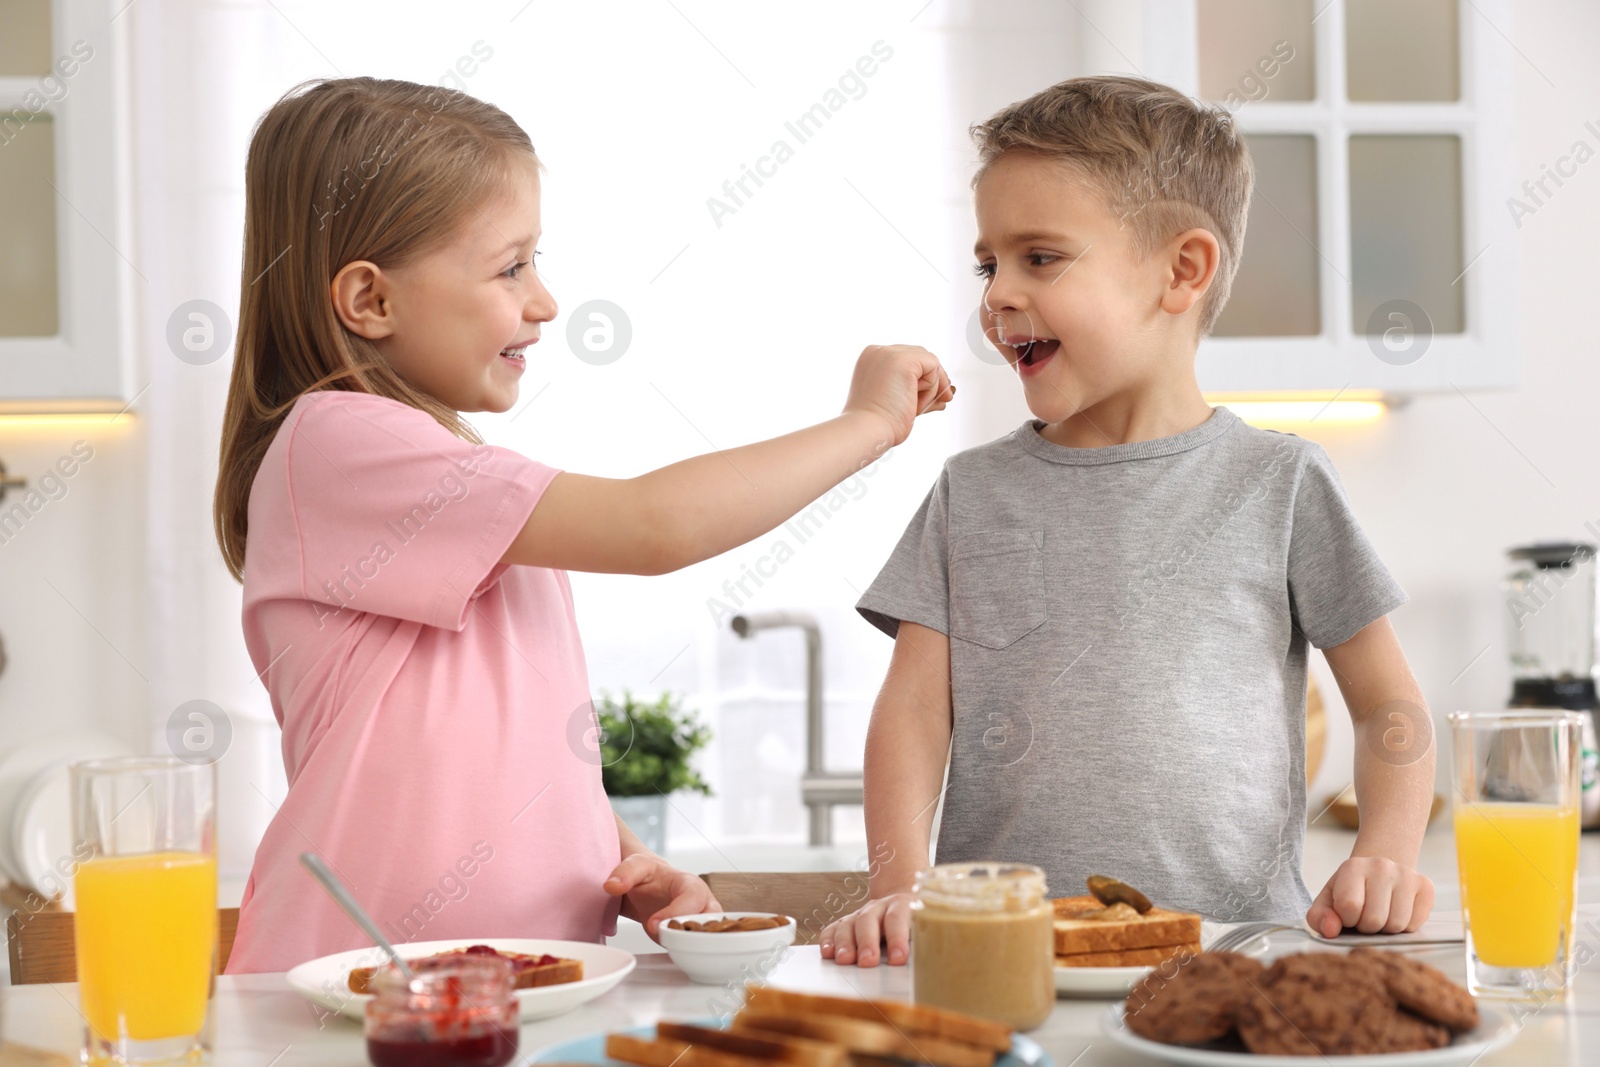 Photo of Little children having fun during breakfast at table in kitchen